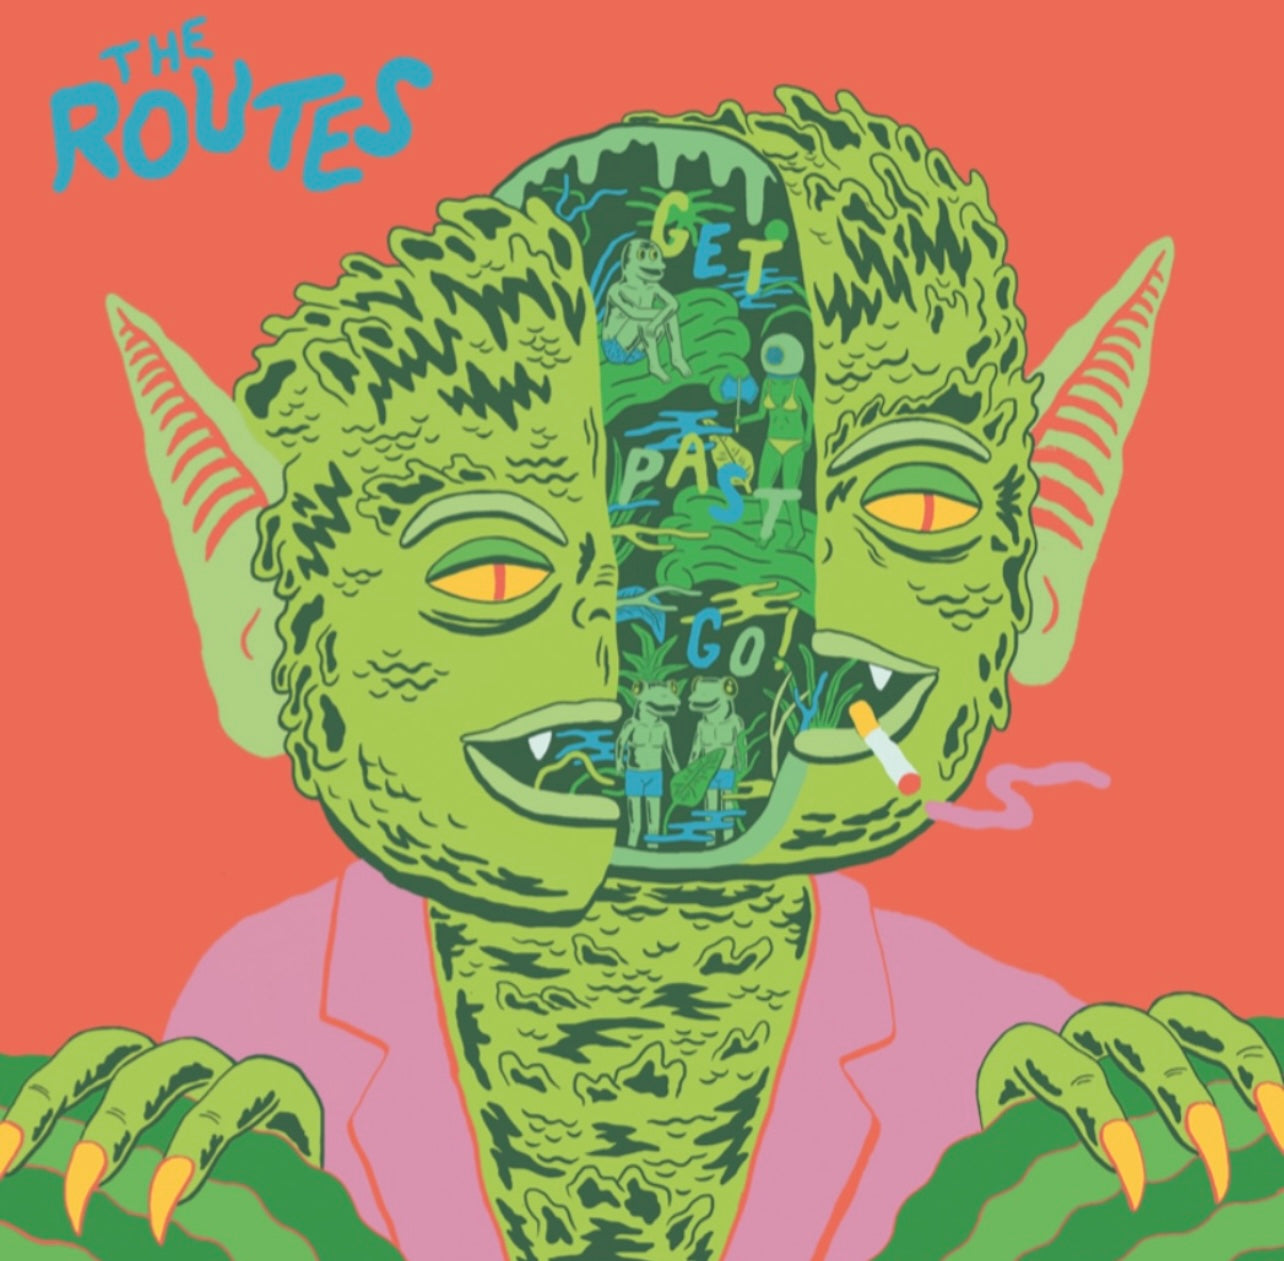 OMR-069 The Routes “Get Past Go!” LP (Colored Vinyl/CD)